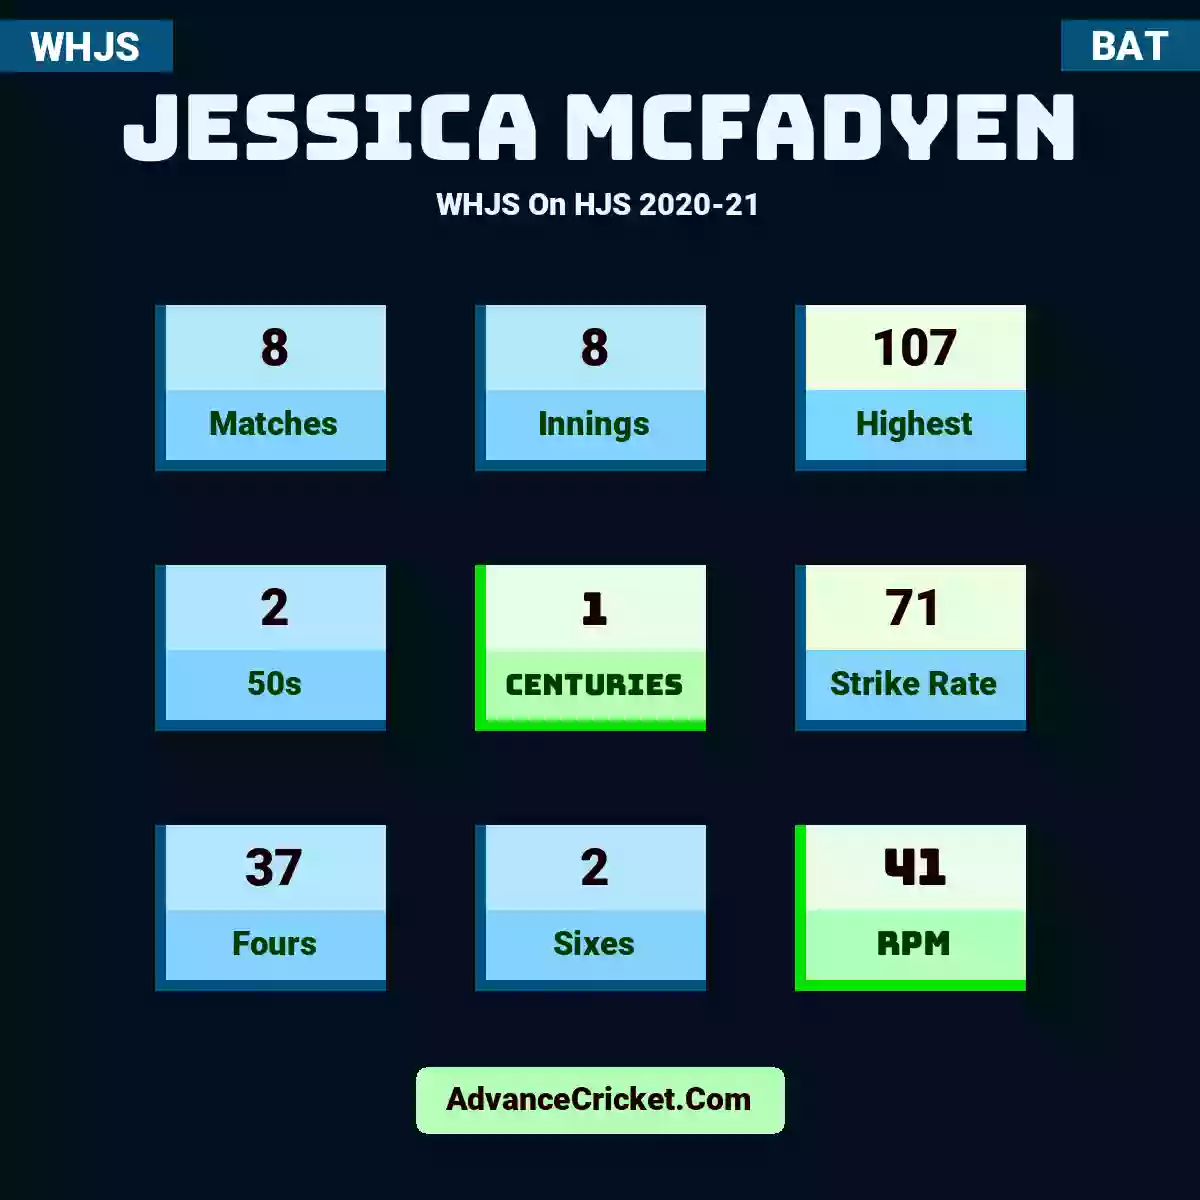 Jessica McFadyen WHJS  On HJS 2020-21, Jessica McFadyen played 8 matches, scored 107 runs as highest, 2 half-centuries, and 1 centuries, with a strike rate of 71. J.McFadyen hit 37 fours and 2 sixes, with an RPM of 41.